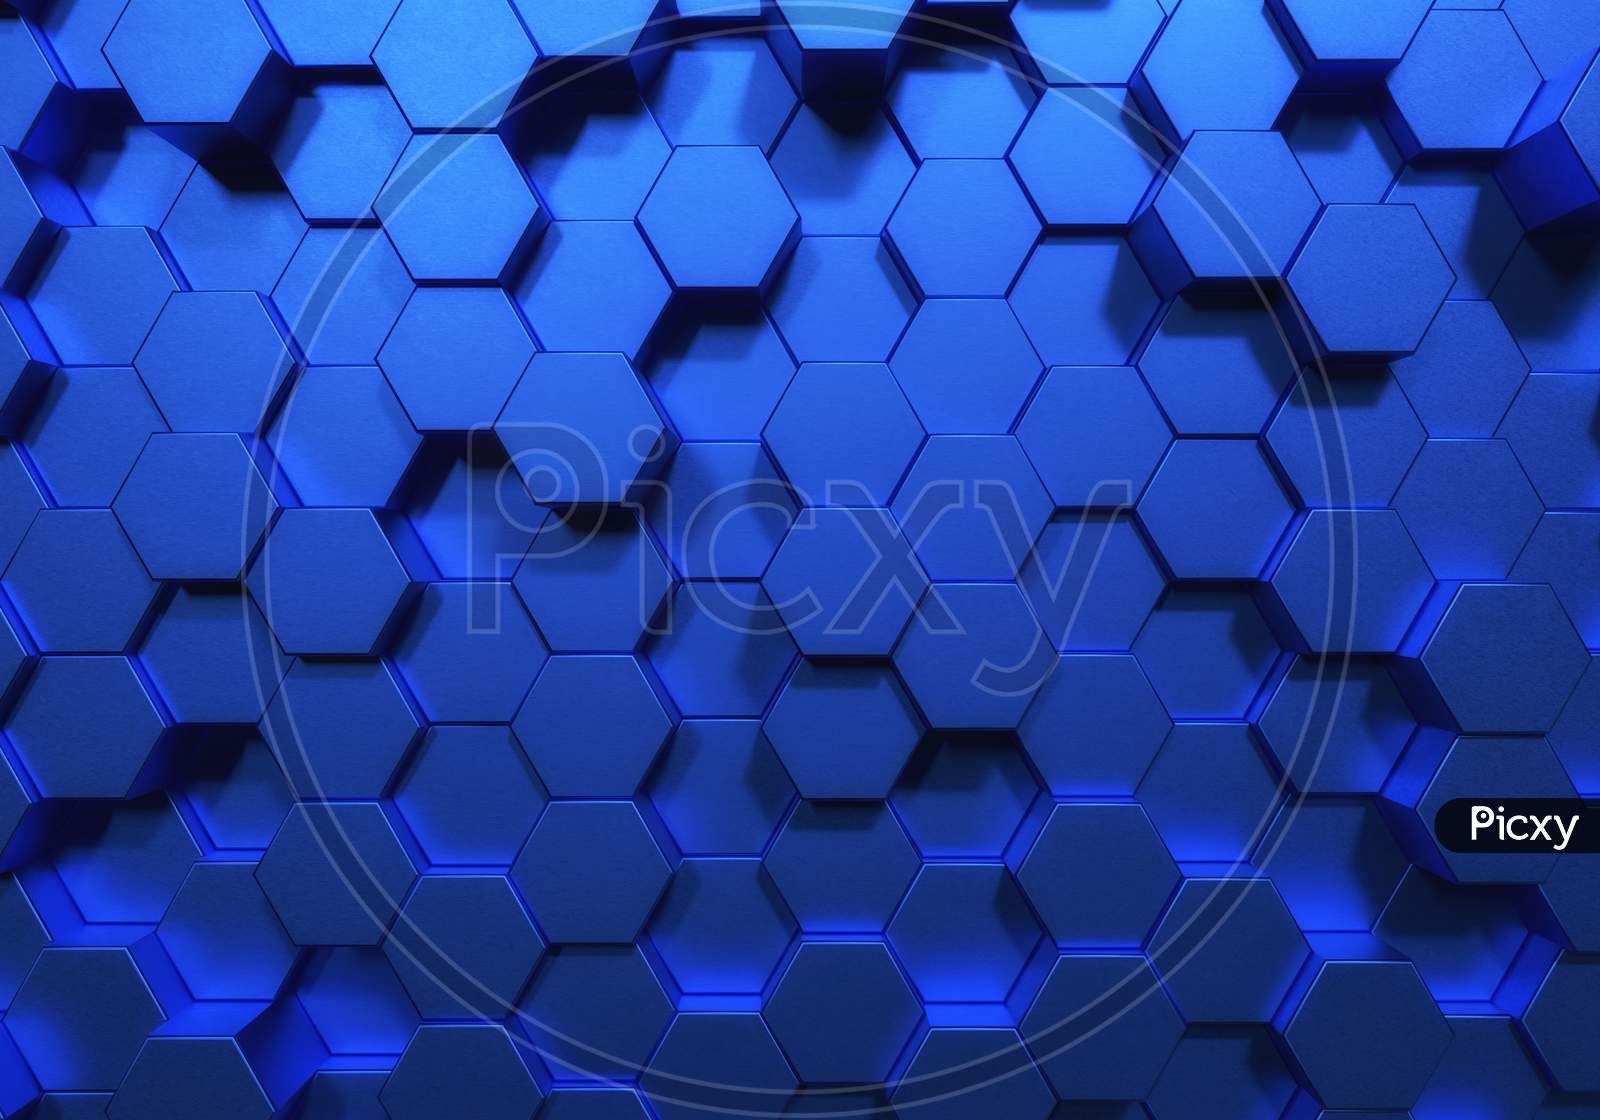 Blue Hexagon Honeycomb Shapes Matte Surface Moving Up Down Randomly. Abstract Modern Style Design Background Concept. 3D Illustration Rendering Graphic Design